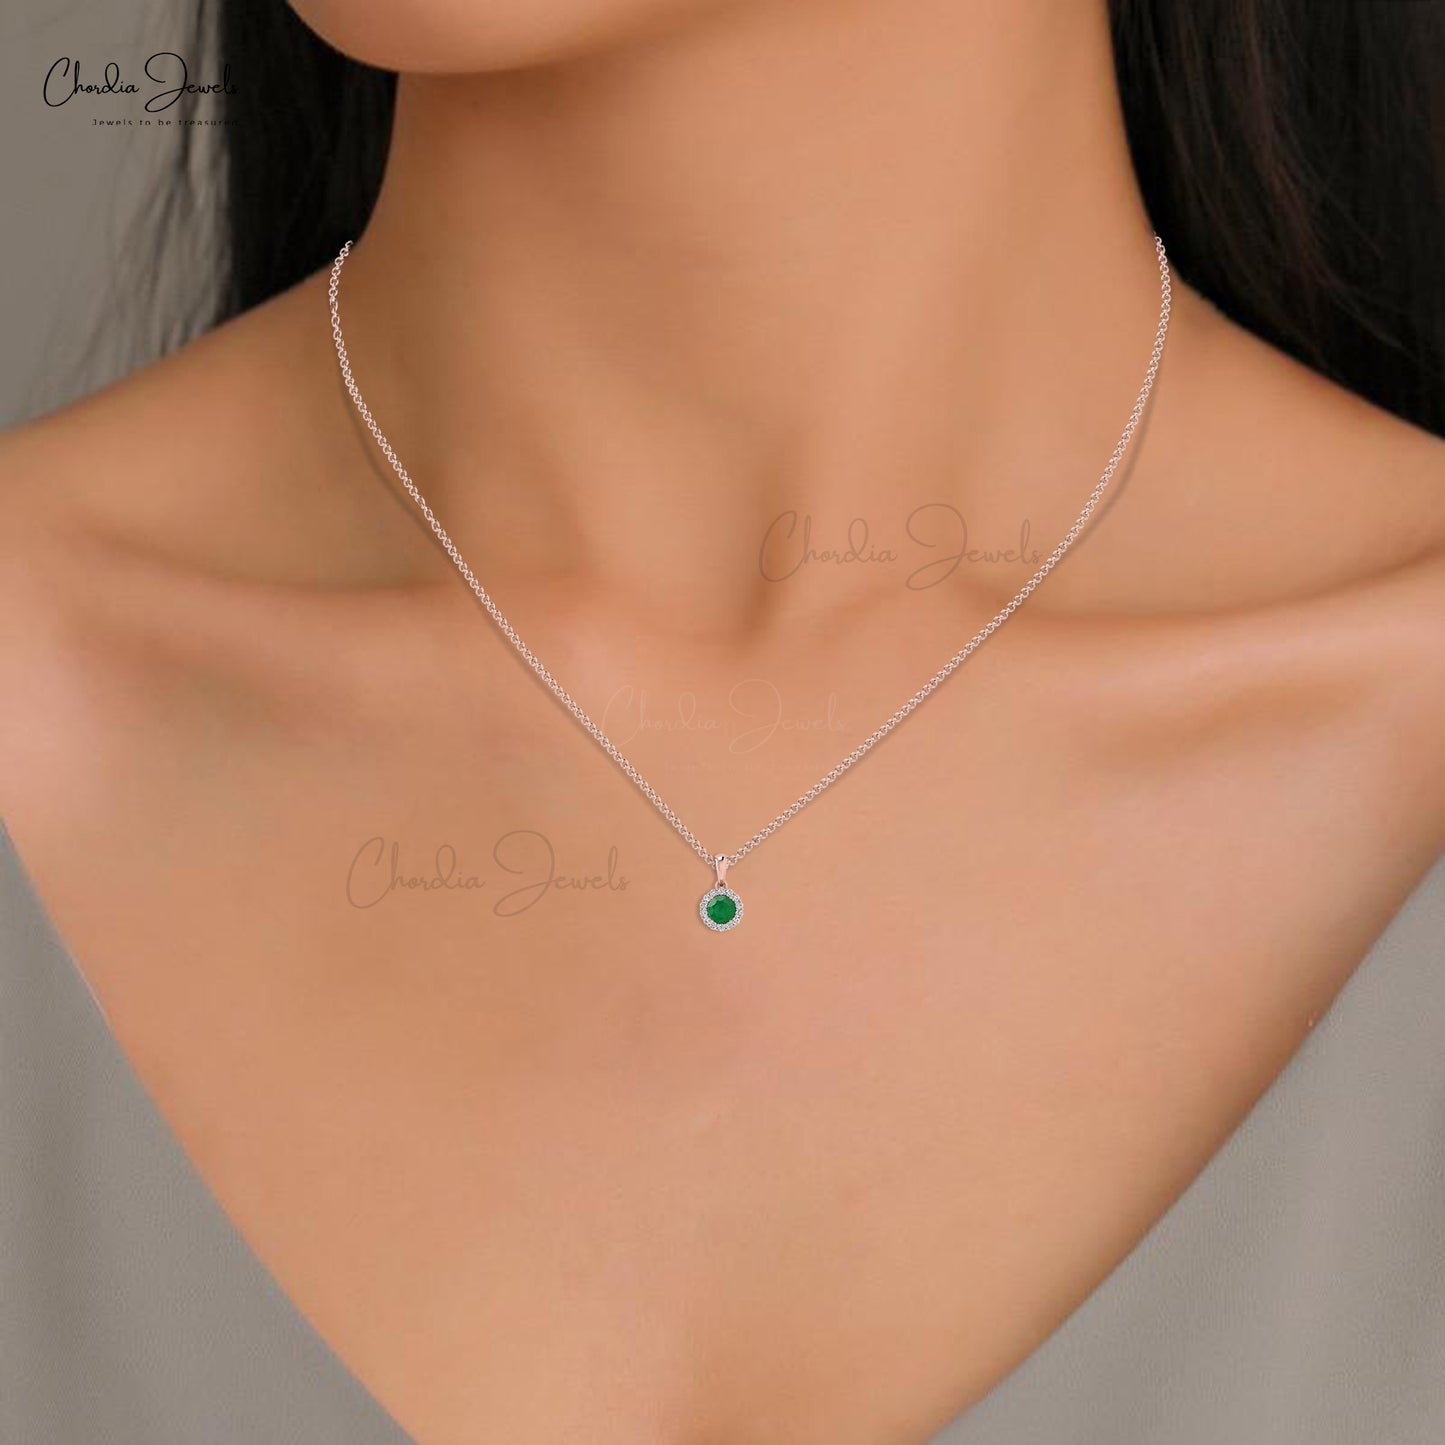 Load image into Gallery viewer, Genuine Diamond Halo Emerald Pendant In 14k Real Gold May Birthstone Handcrafted Pendant
